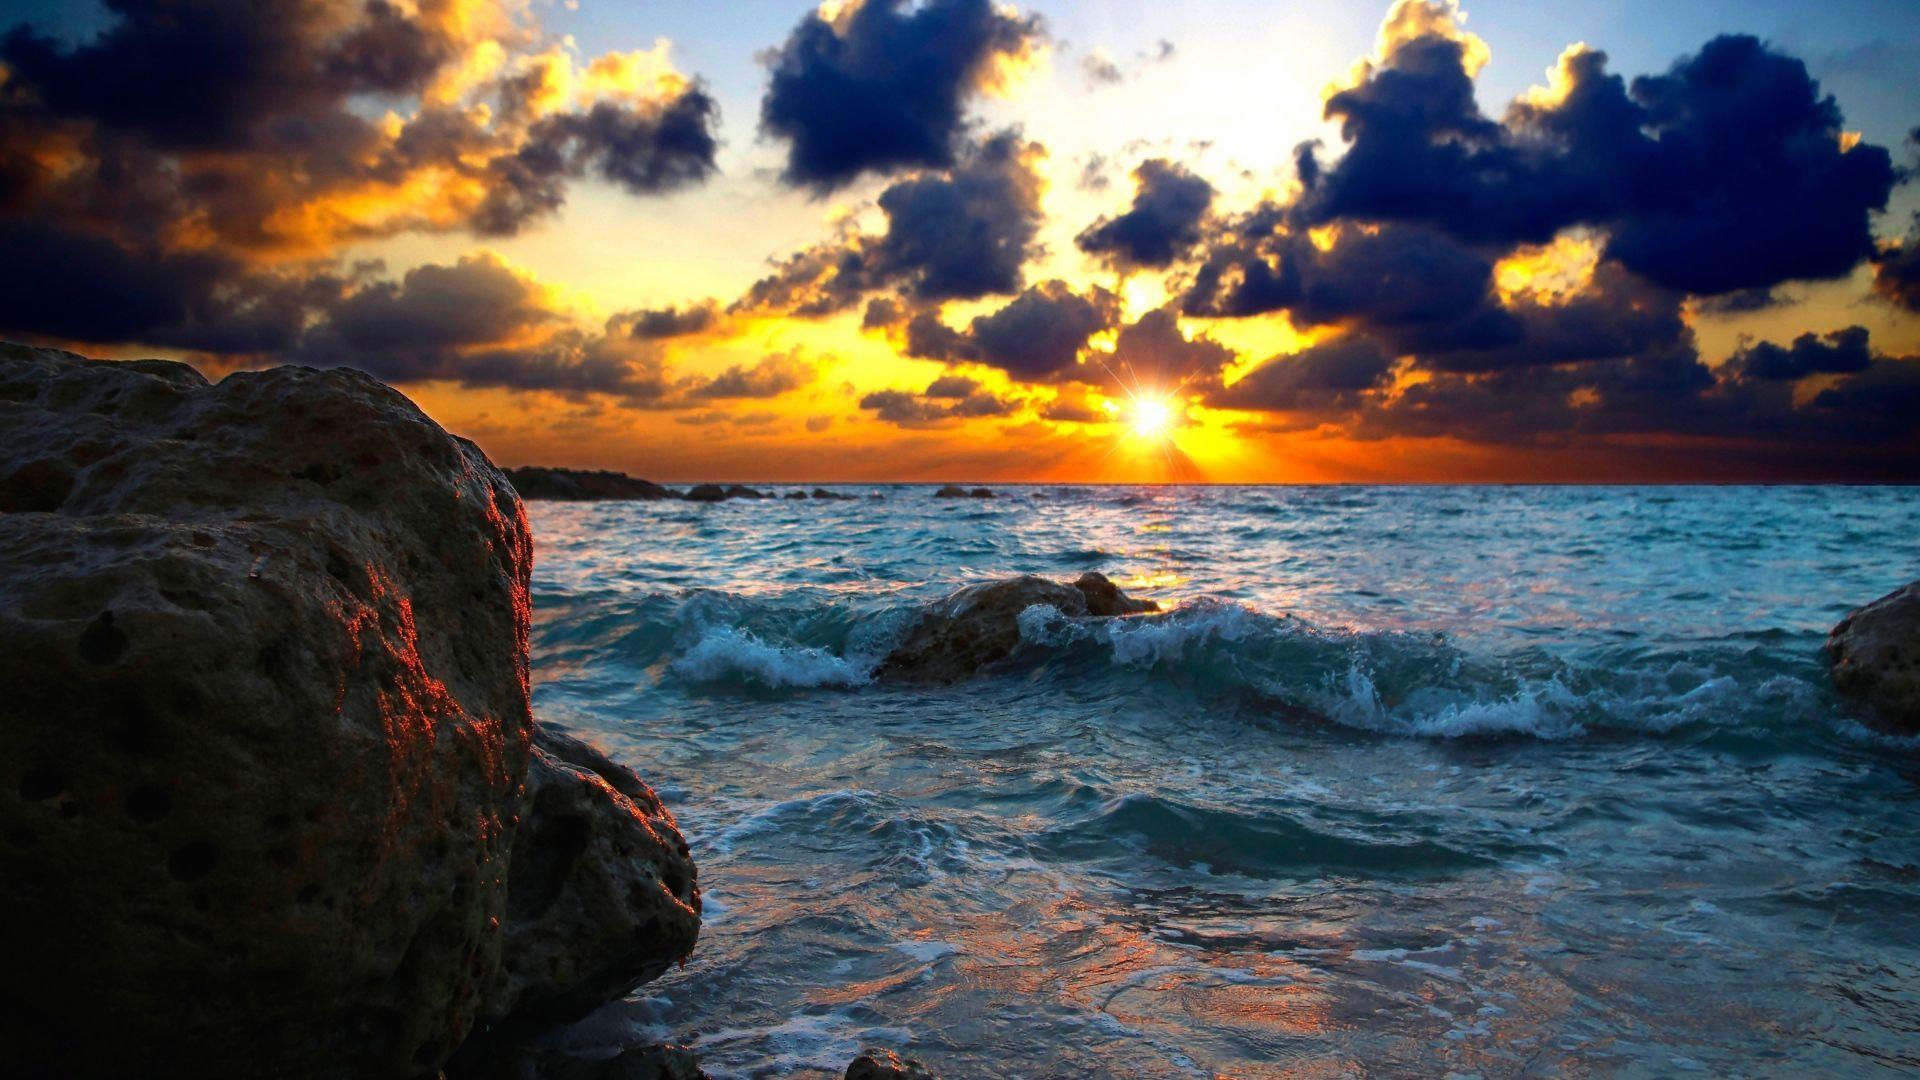 Download Wallpapers 1920x1080 Sea, Surf, Sunset, Stones Full HD 1080p